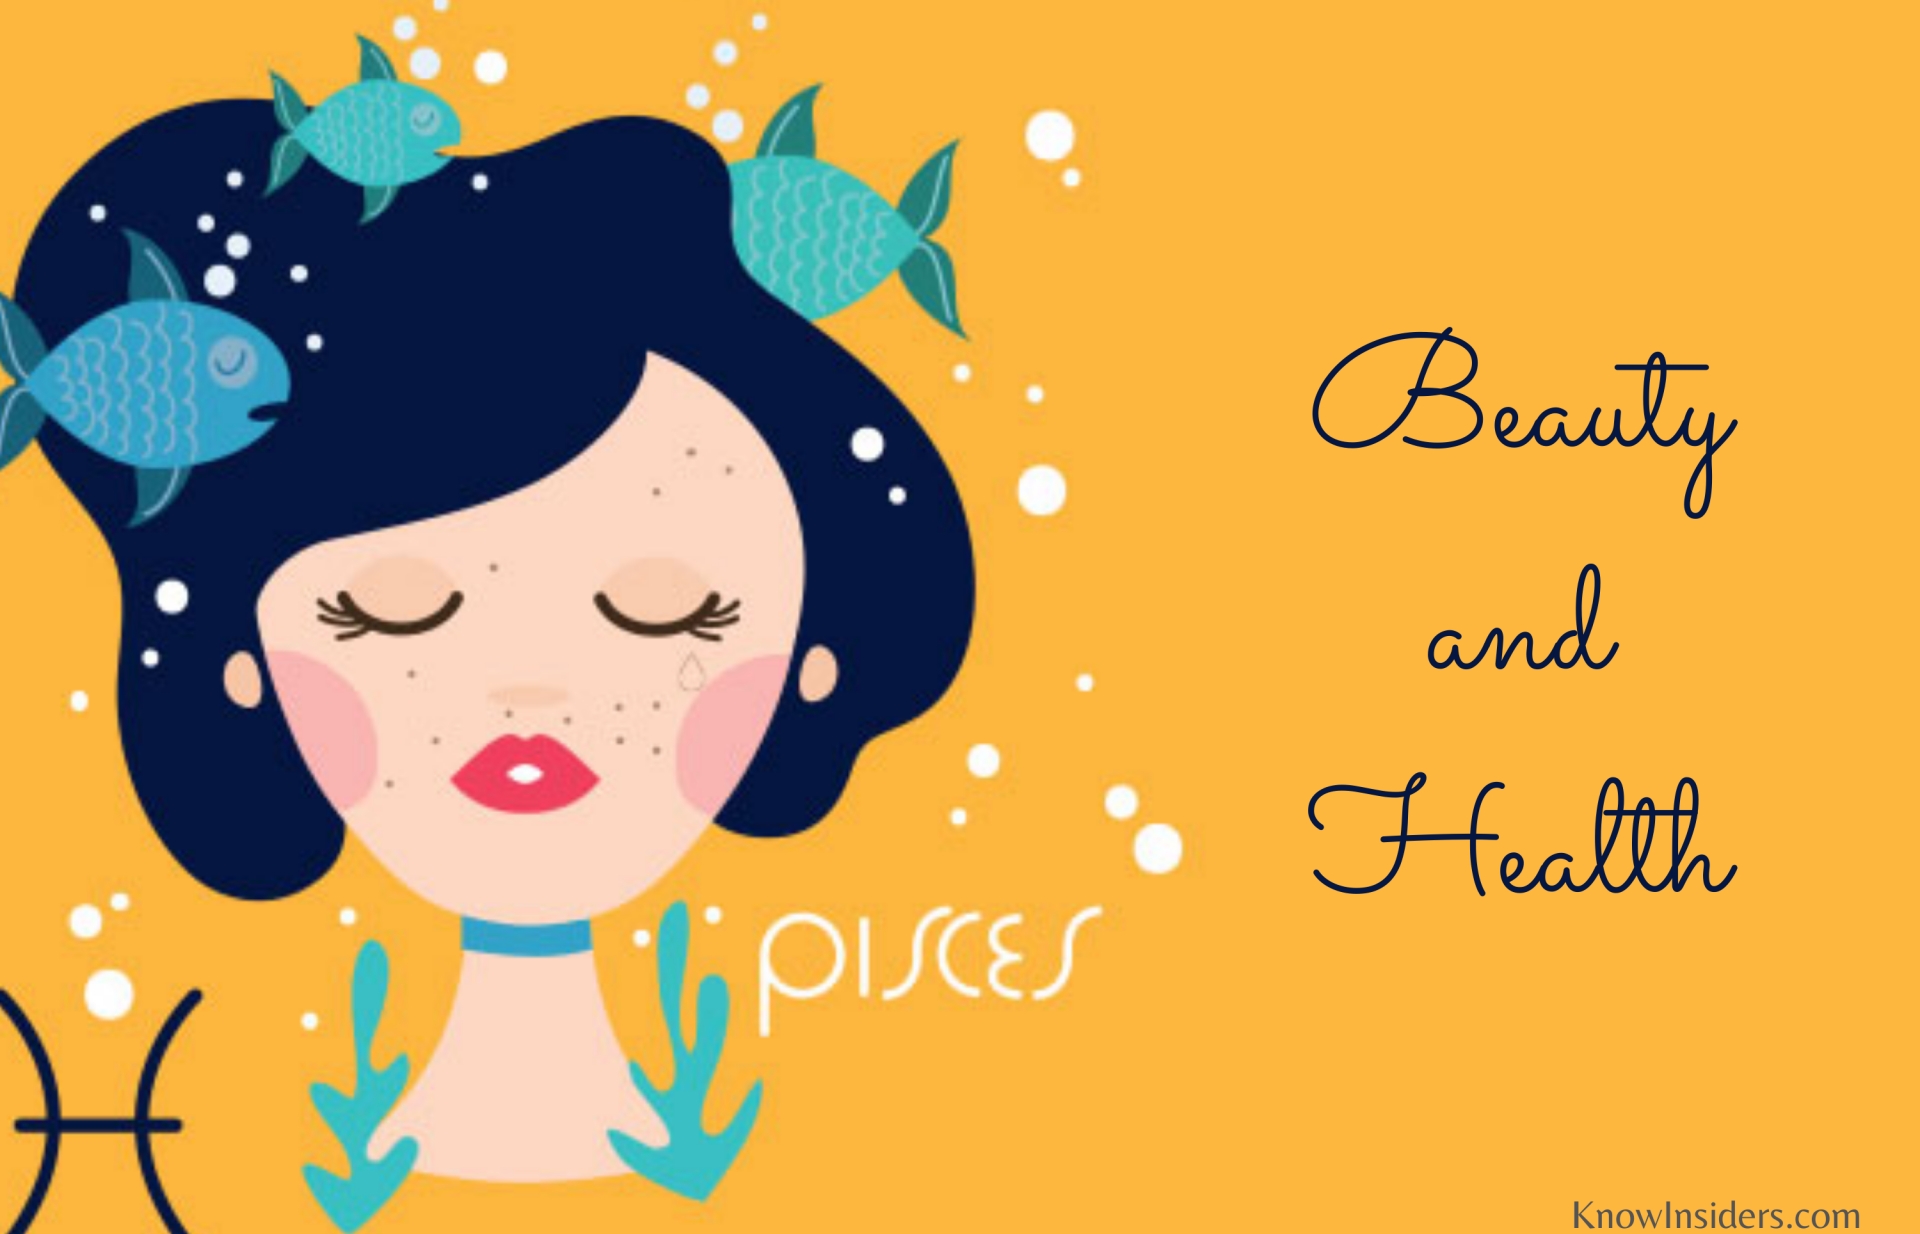 PISCES Horoscope: Astrological Prediction for Beauty & Health - All Life